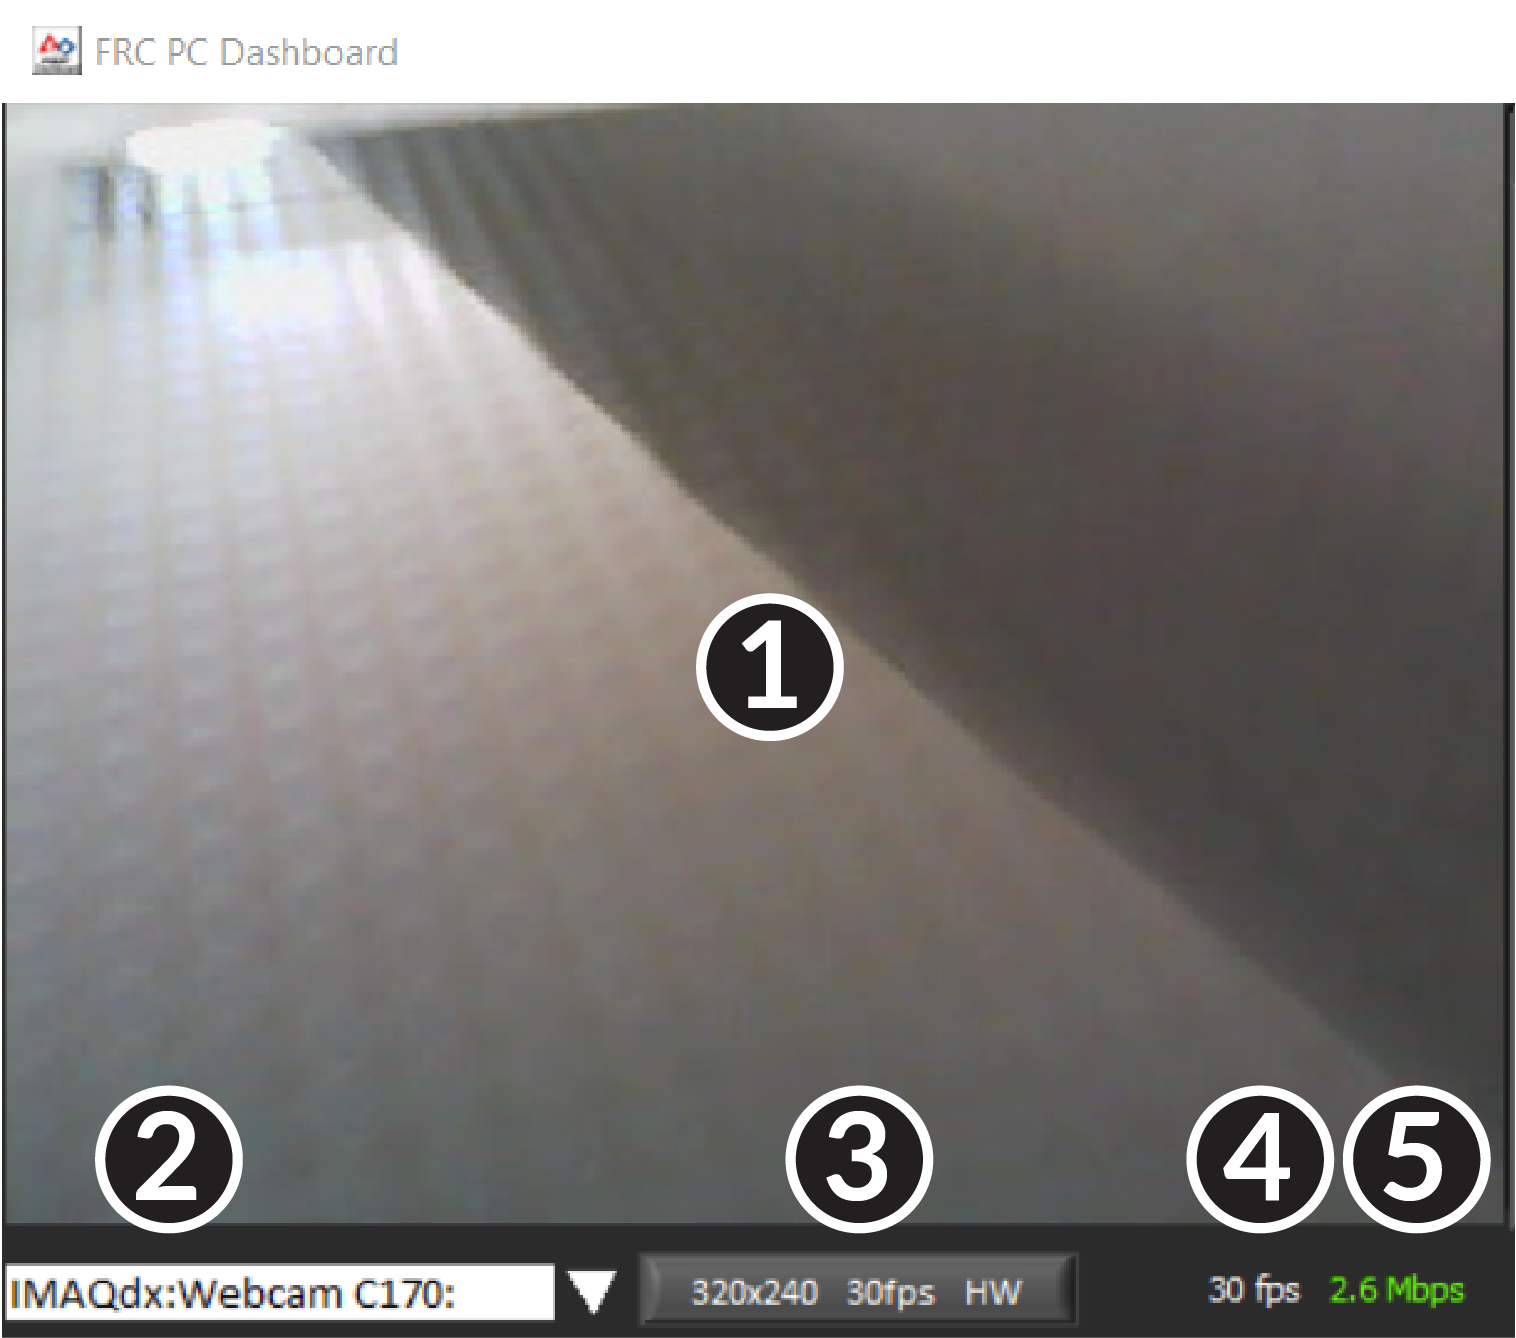 Shows the main camera image on the left pane of the dashboard.